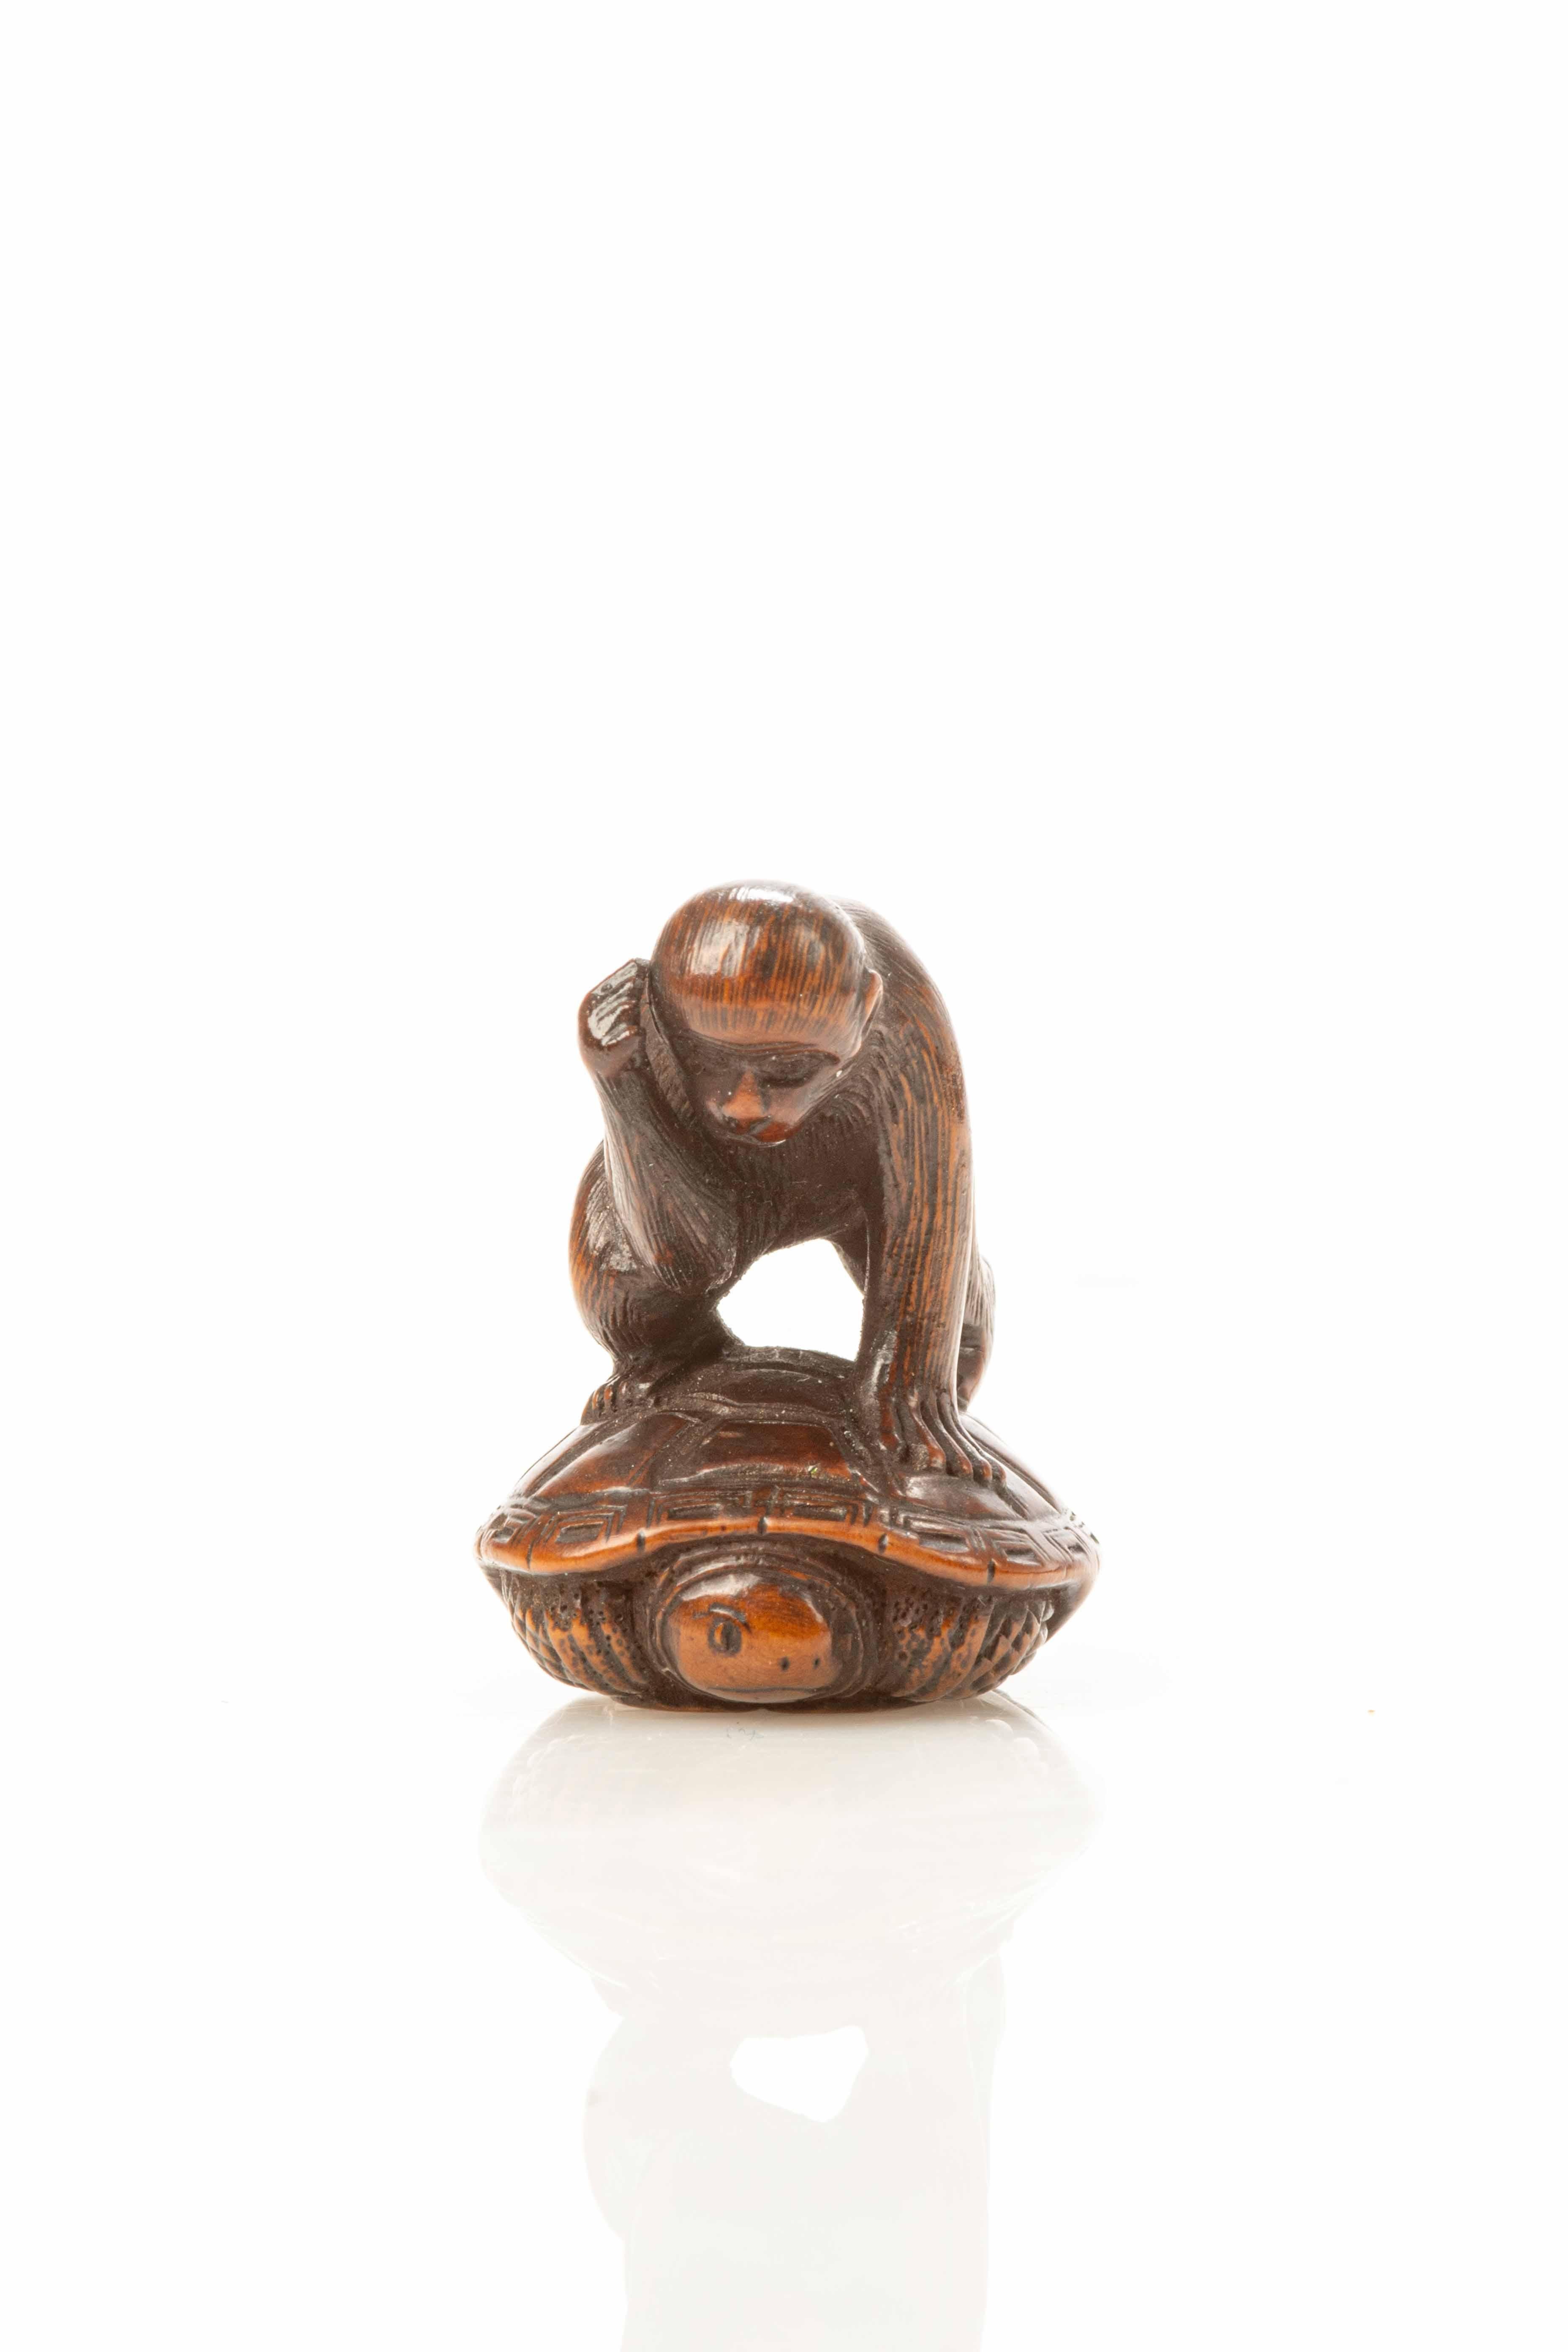 A boxwood netsuke depicting a monkey trying to catch a turtle, which retracts its head and legs inside the carapace.

Origin: Japan

Period: Edo 19th century.

Dimensions: 3.4 x 3 x 2.5 cm.

State of conservation: Very good